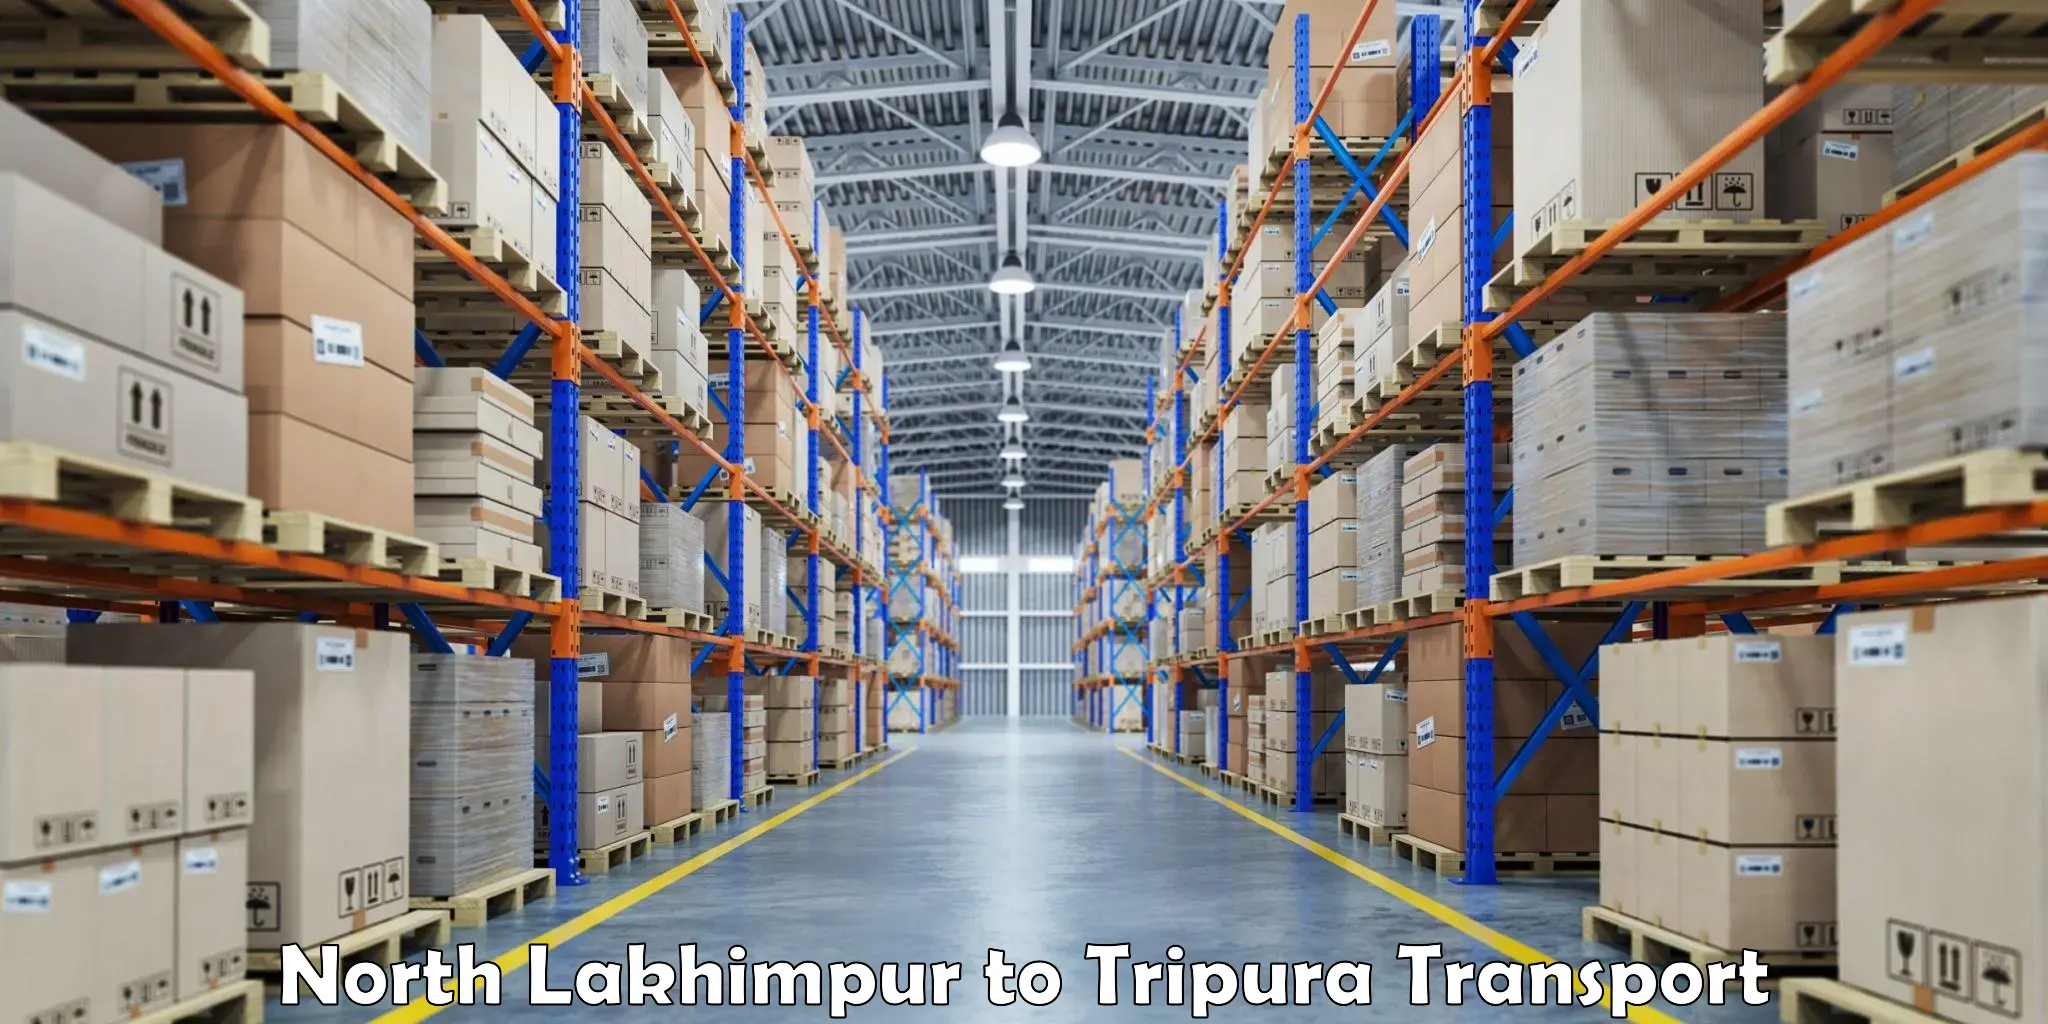 Truck transport companies in India in North Lakhimpur to Tripura